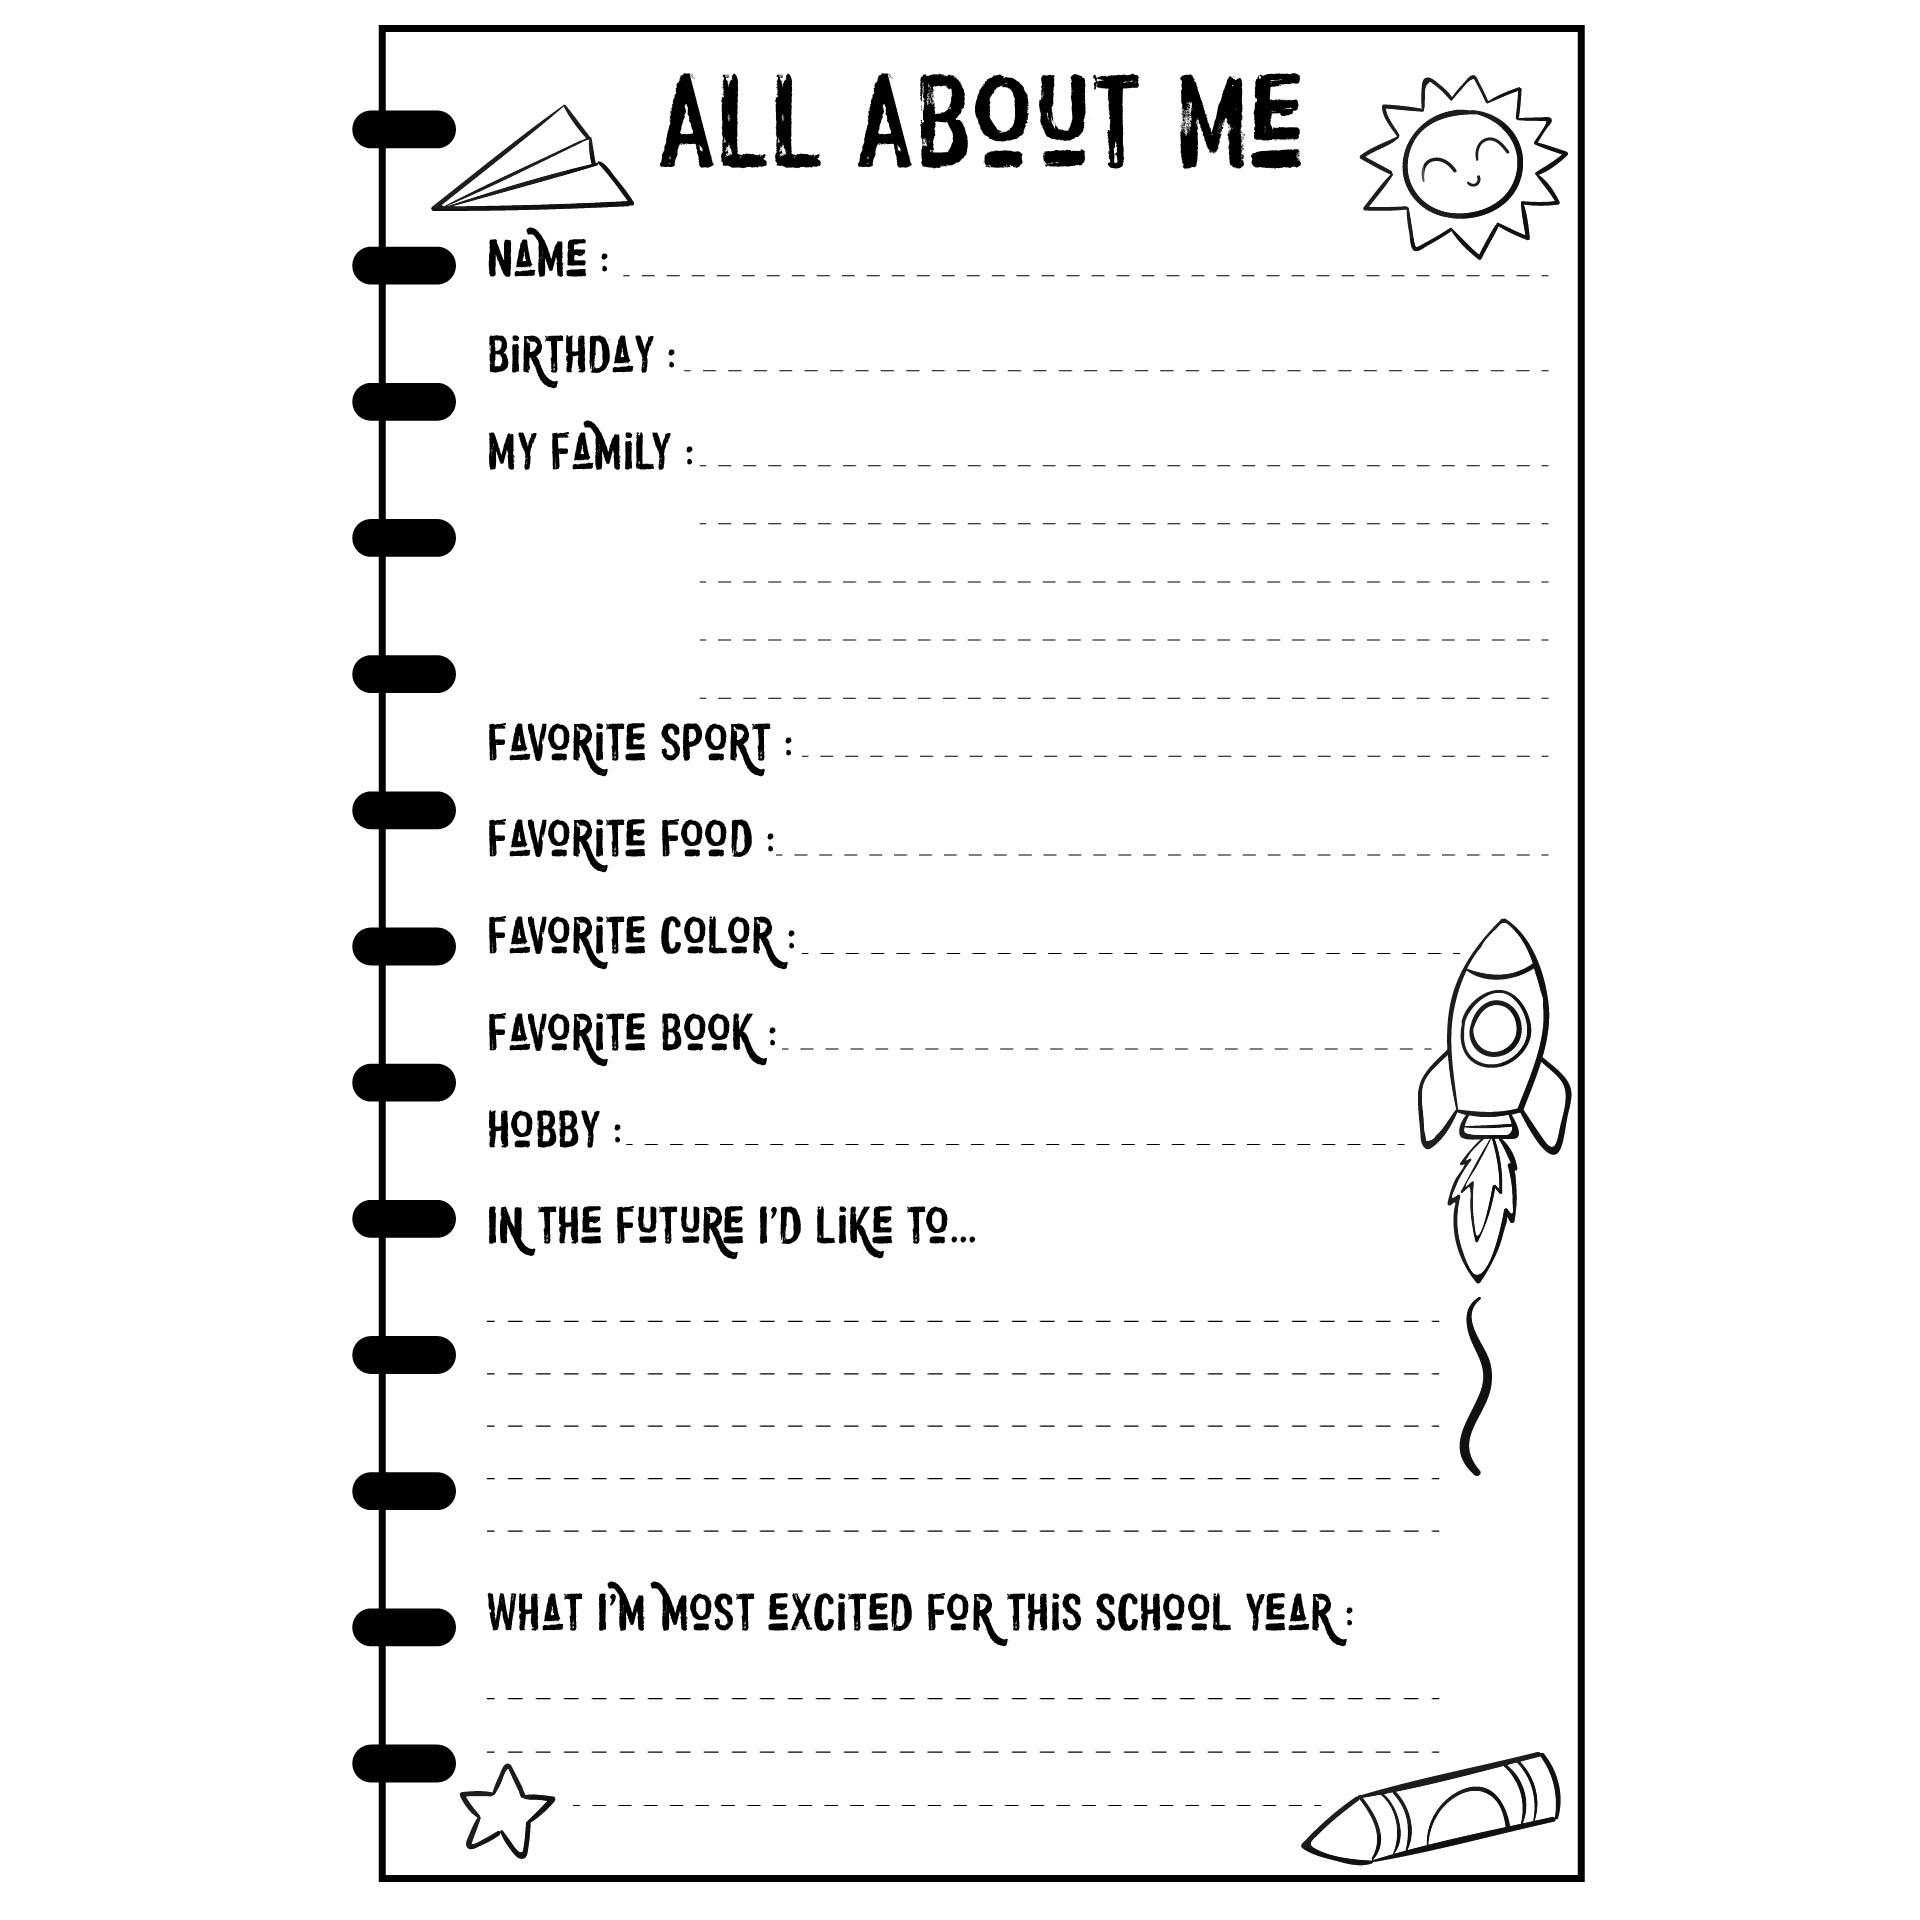 All About Me Printables